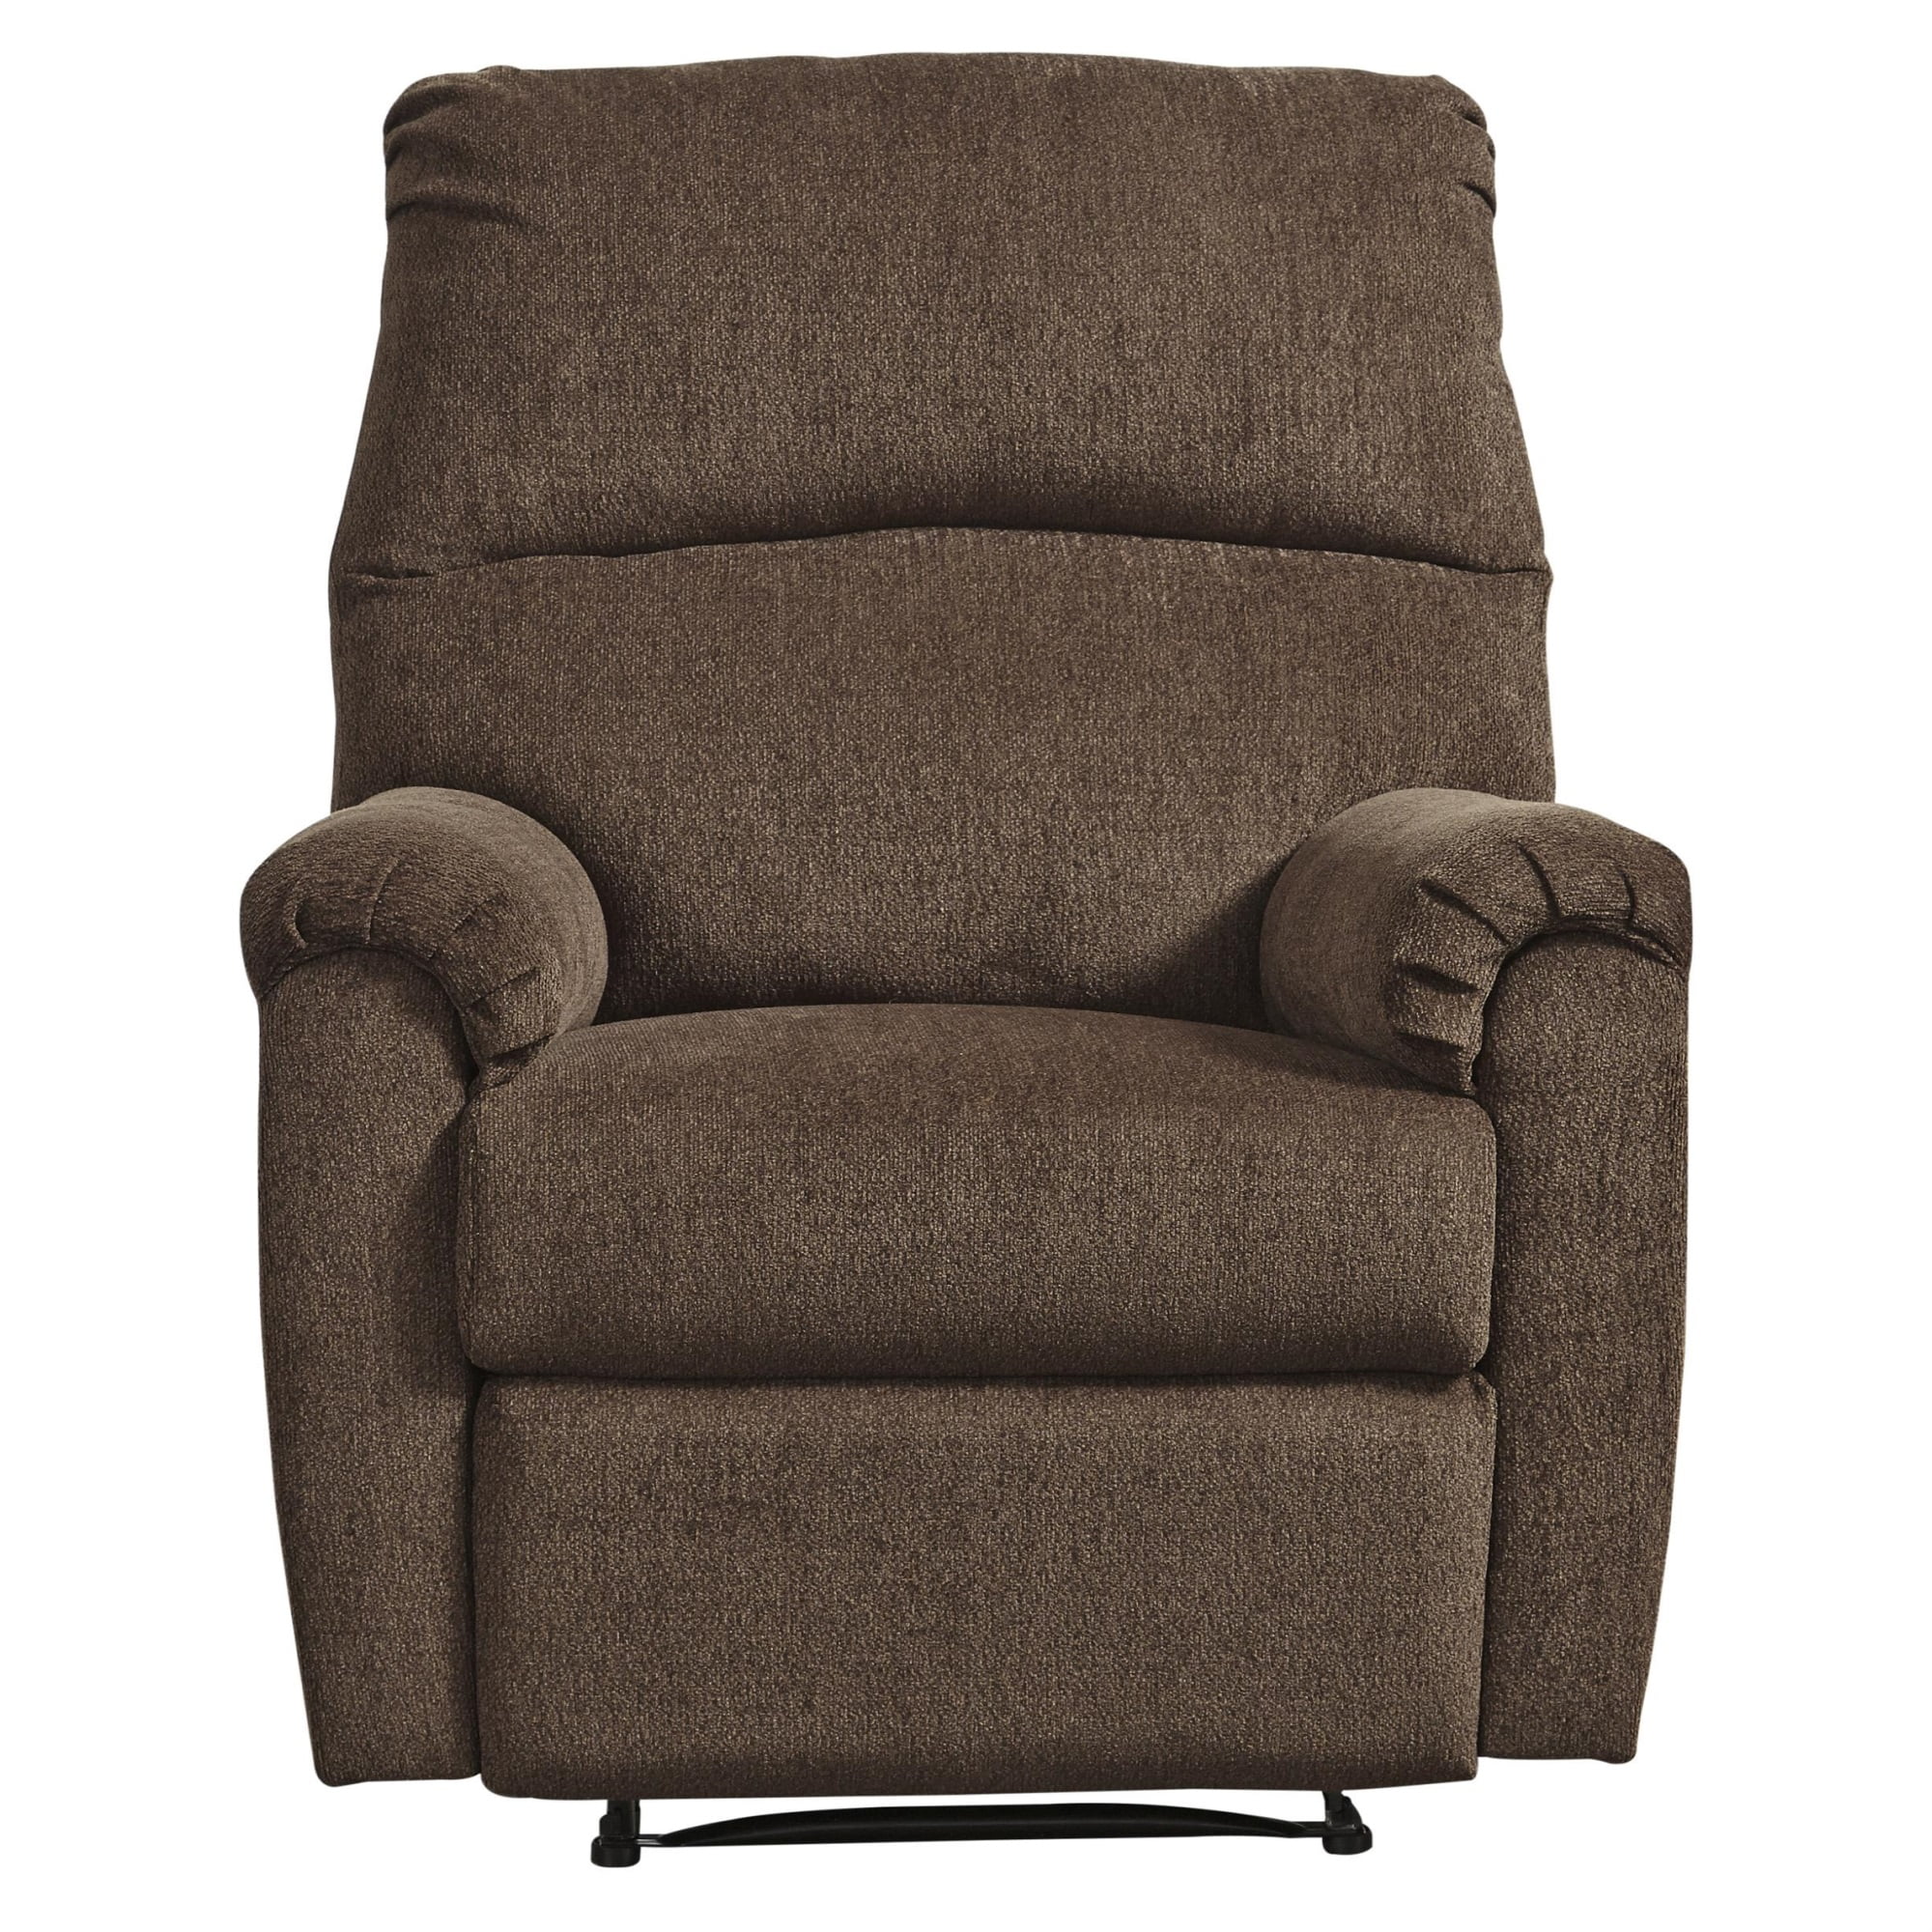 Picture of Benjara BM210774 Fabric Upholstered Zero Wall Recliner with Pillow Top Armrests - Brown - 41 x 35 x 39 in.